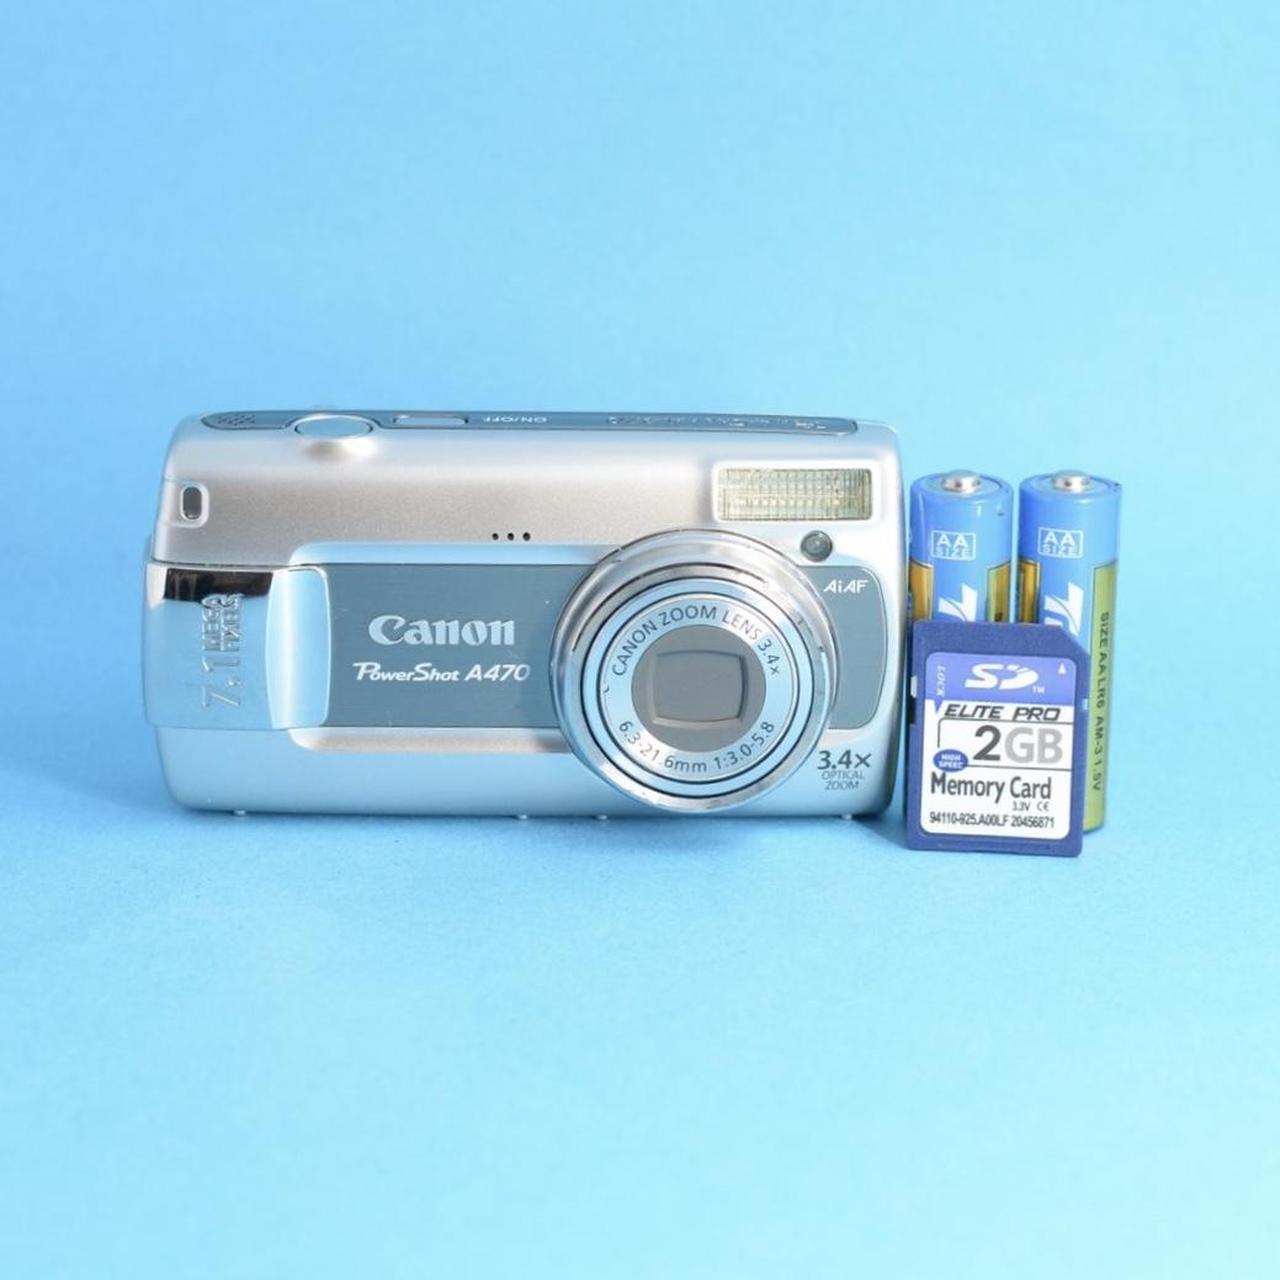 Canon PowerShot A470 | 7.1MP Digital camera with SD... - Depop